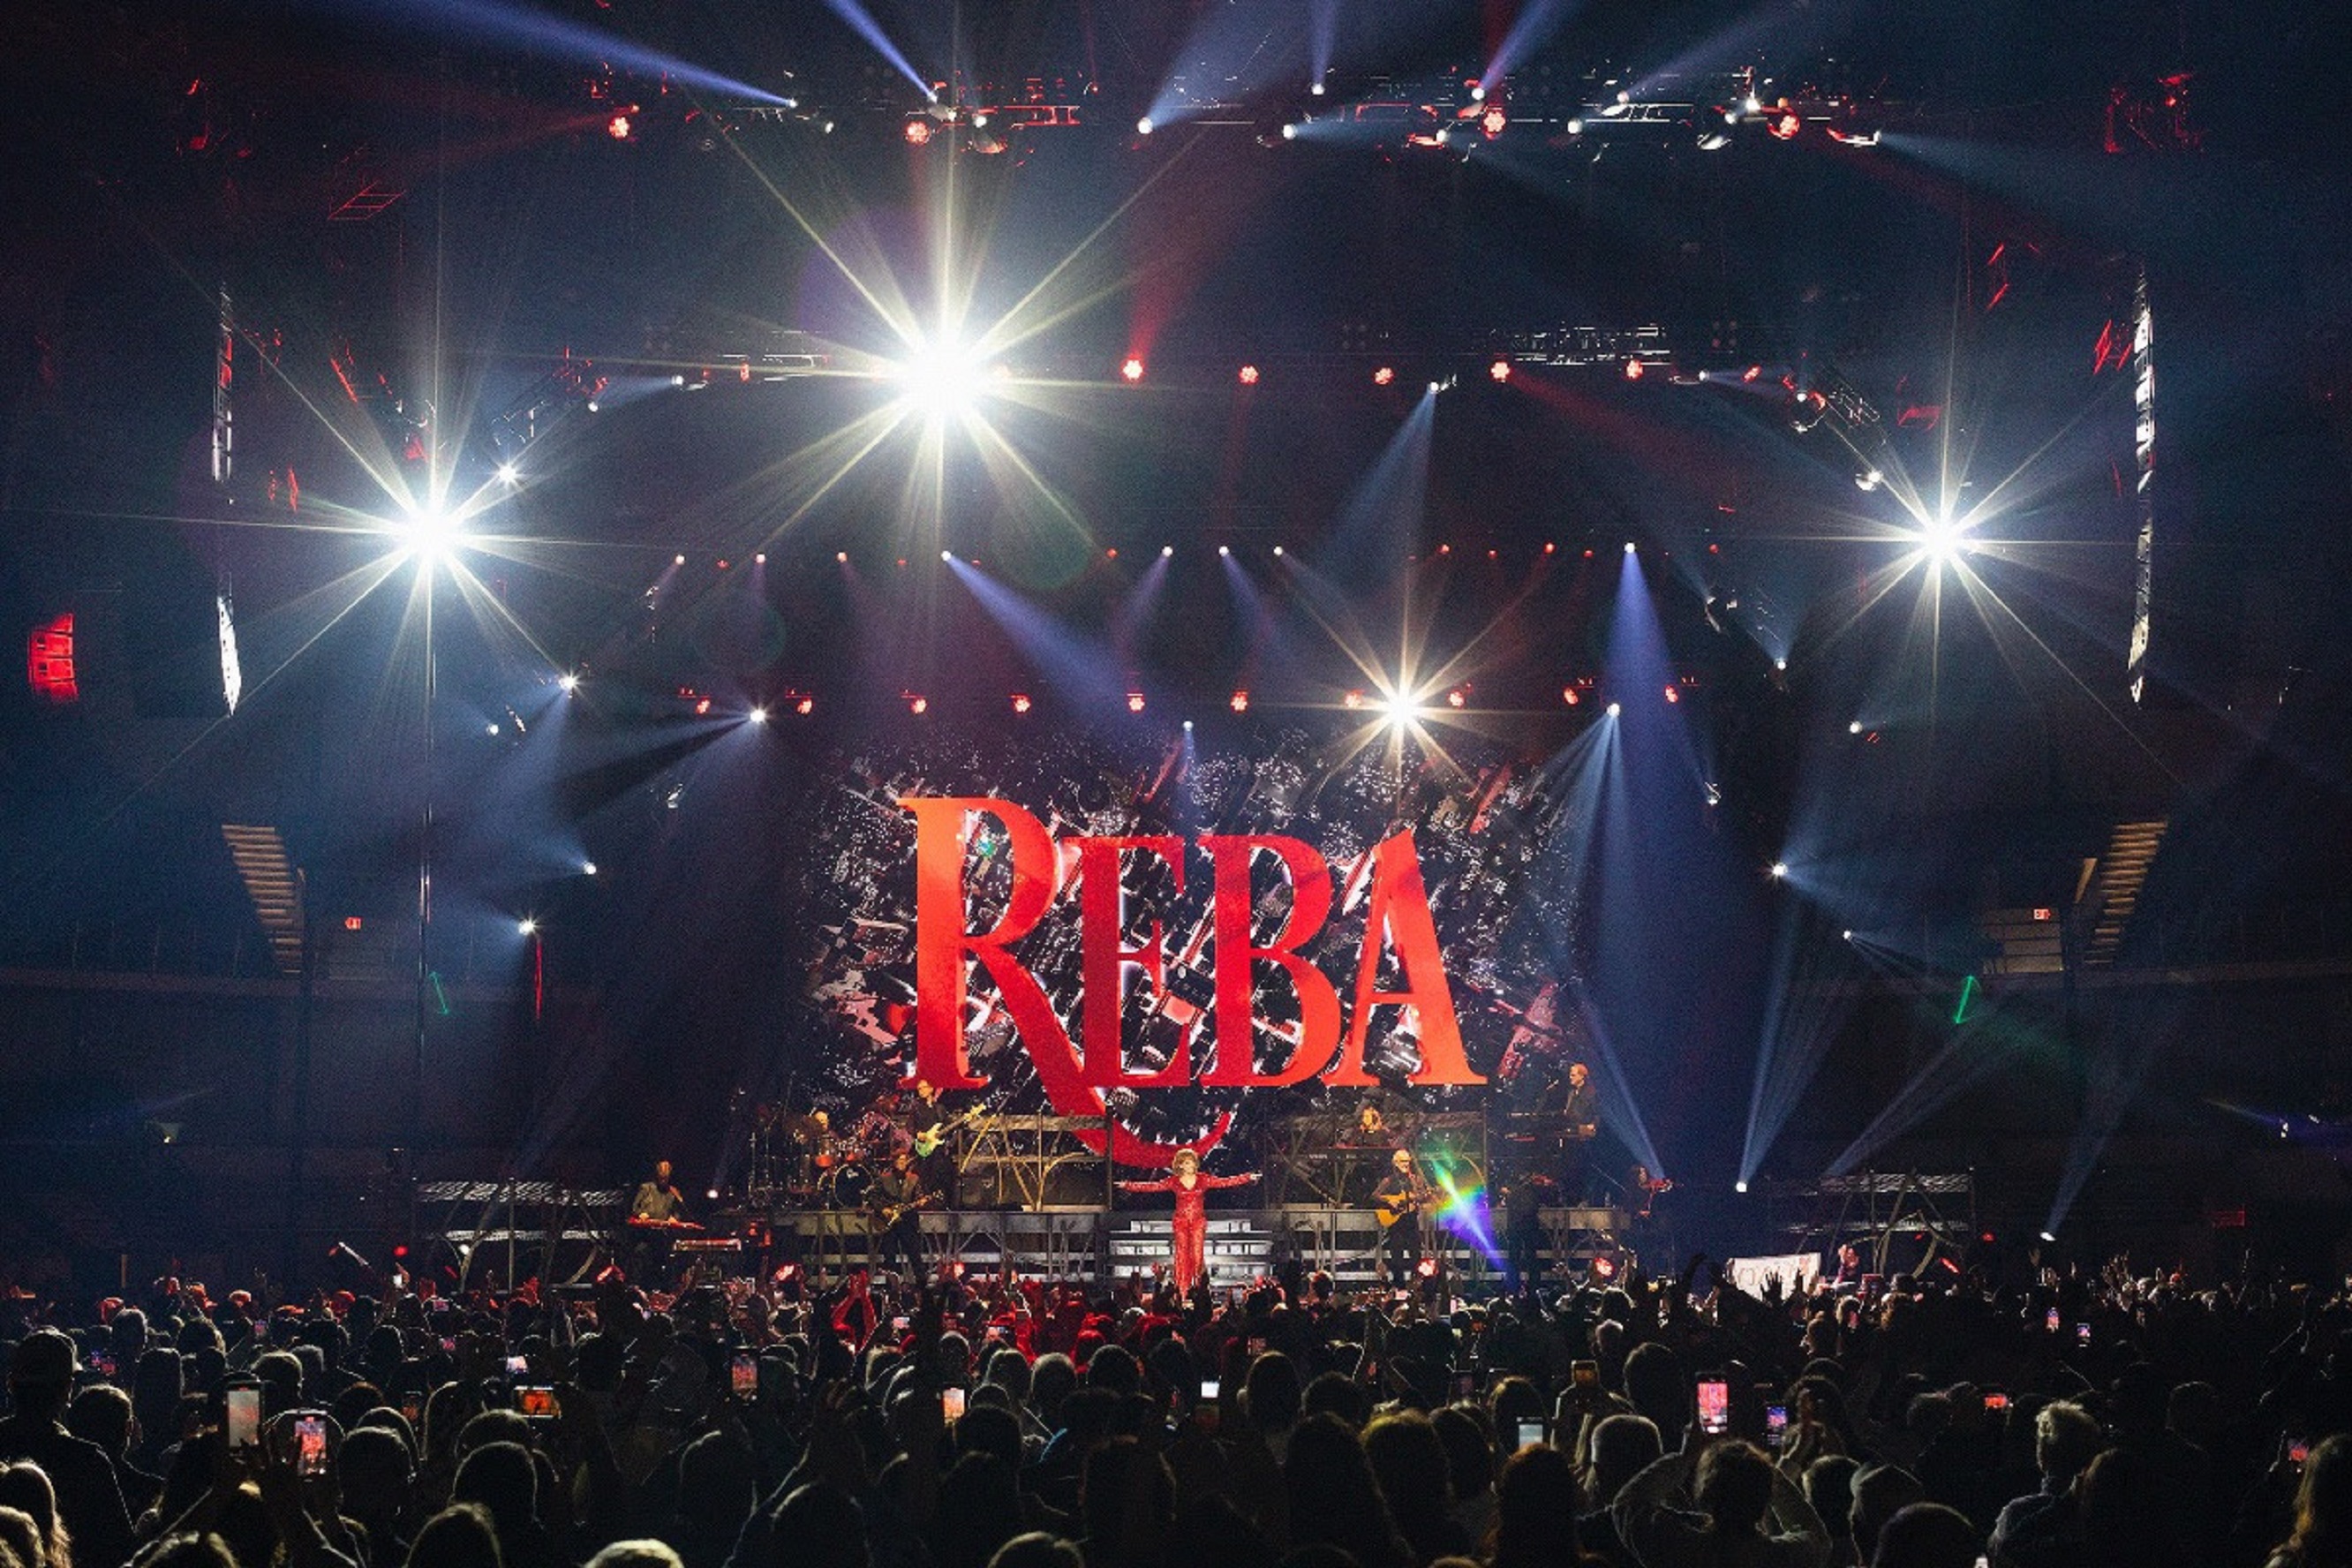 Reba McEntire Launches Arena Tour w/ Sold-Out Weekend